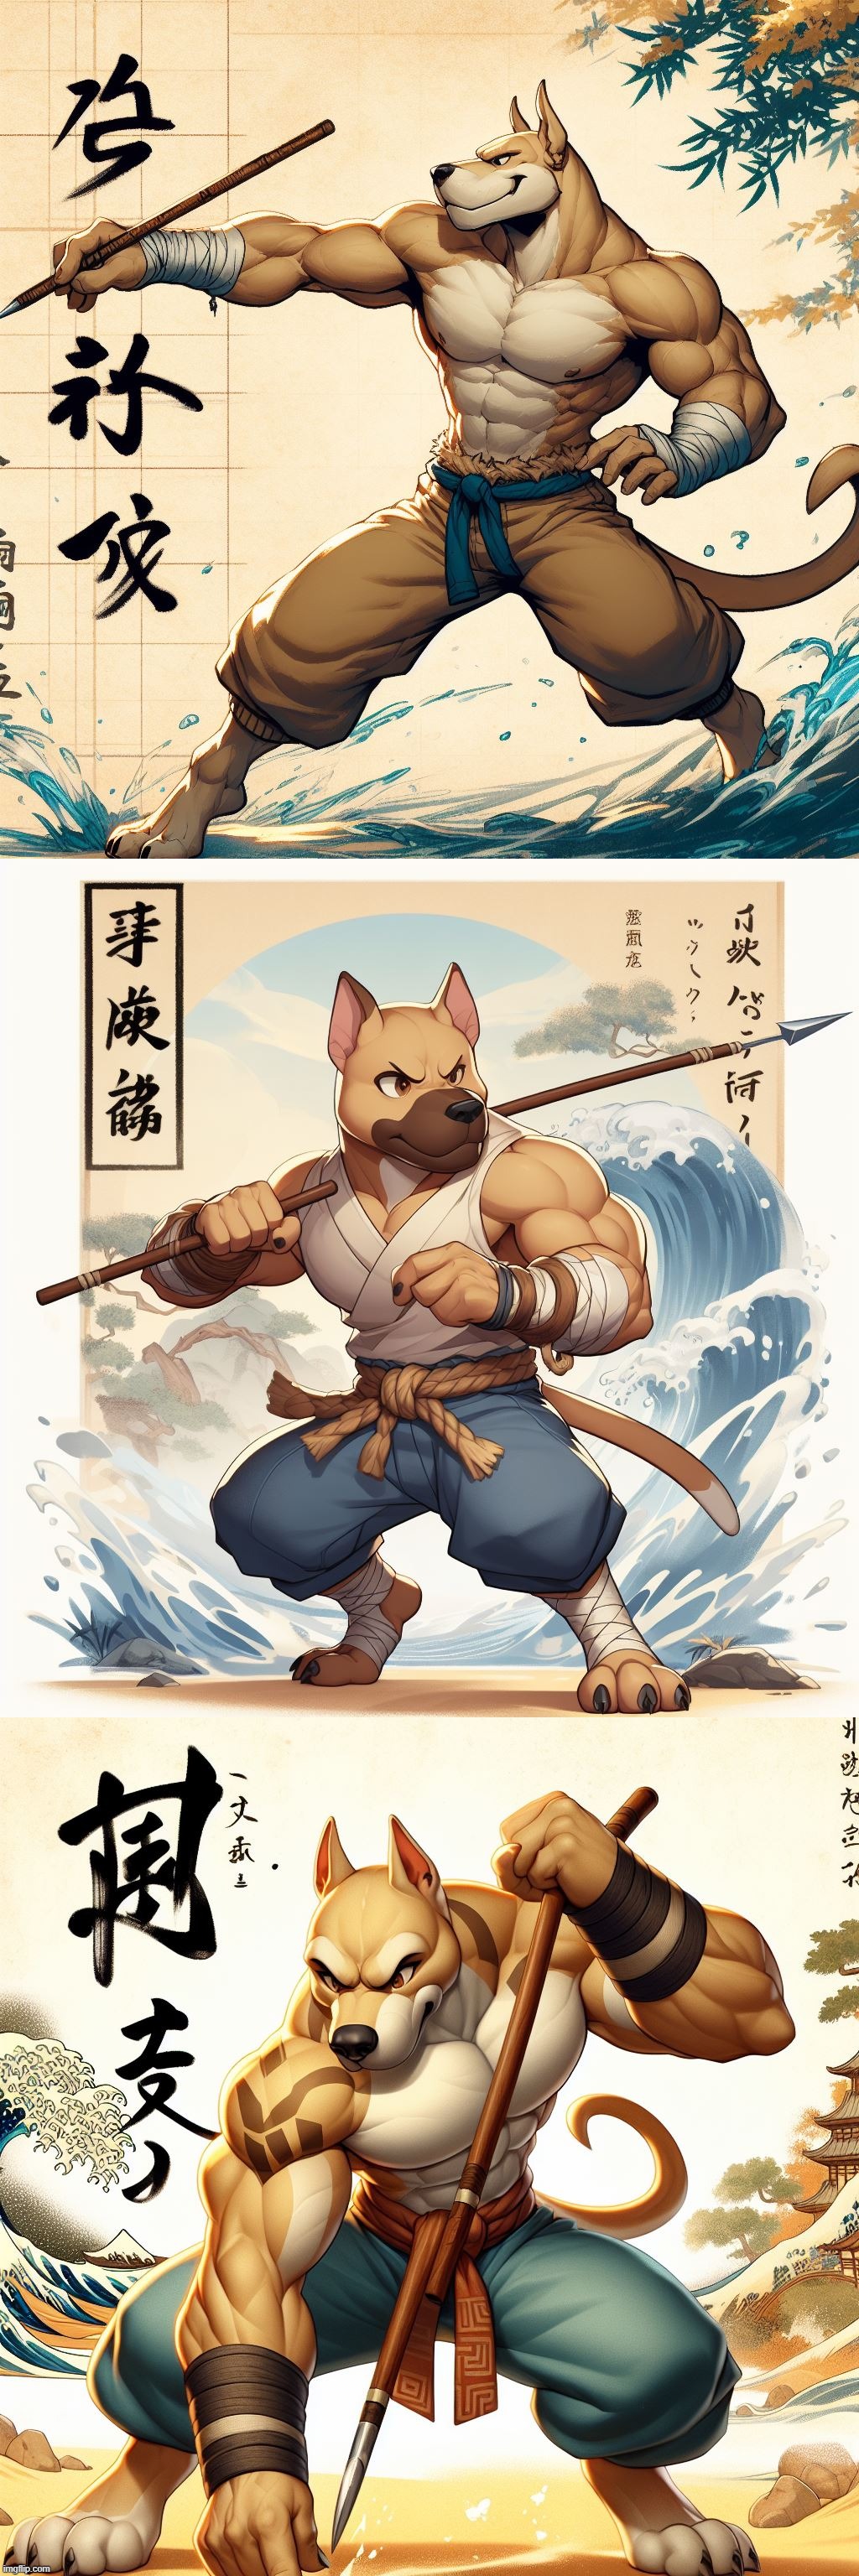 Ai gen: Video game concept based on my friend's dog. Pitbull named "Kanji". Japanese/Chinese clothing and waterpainting backdrop | image tagged in ai generated,anthro,furry,japanese,chinese,pitbull | made w/ Imgflip meme maker